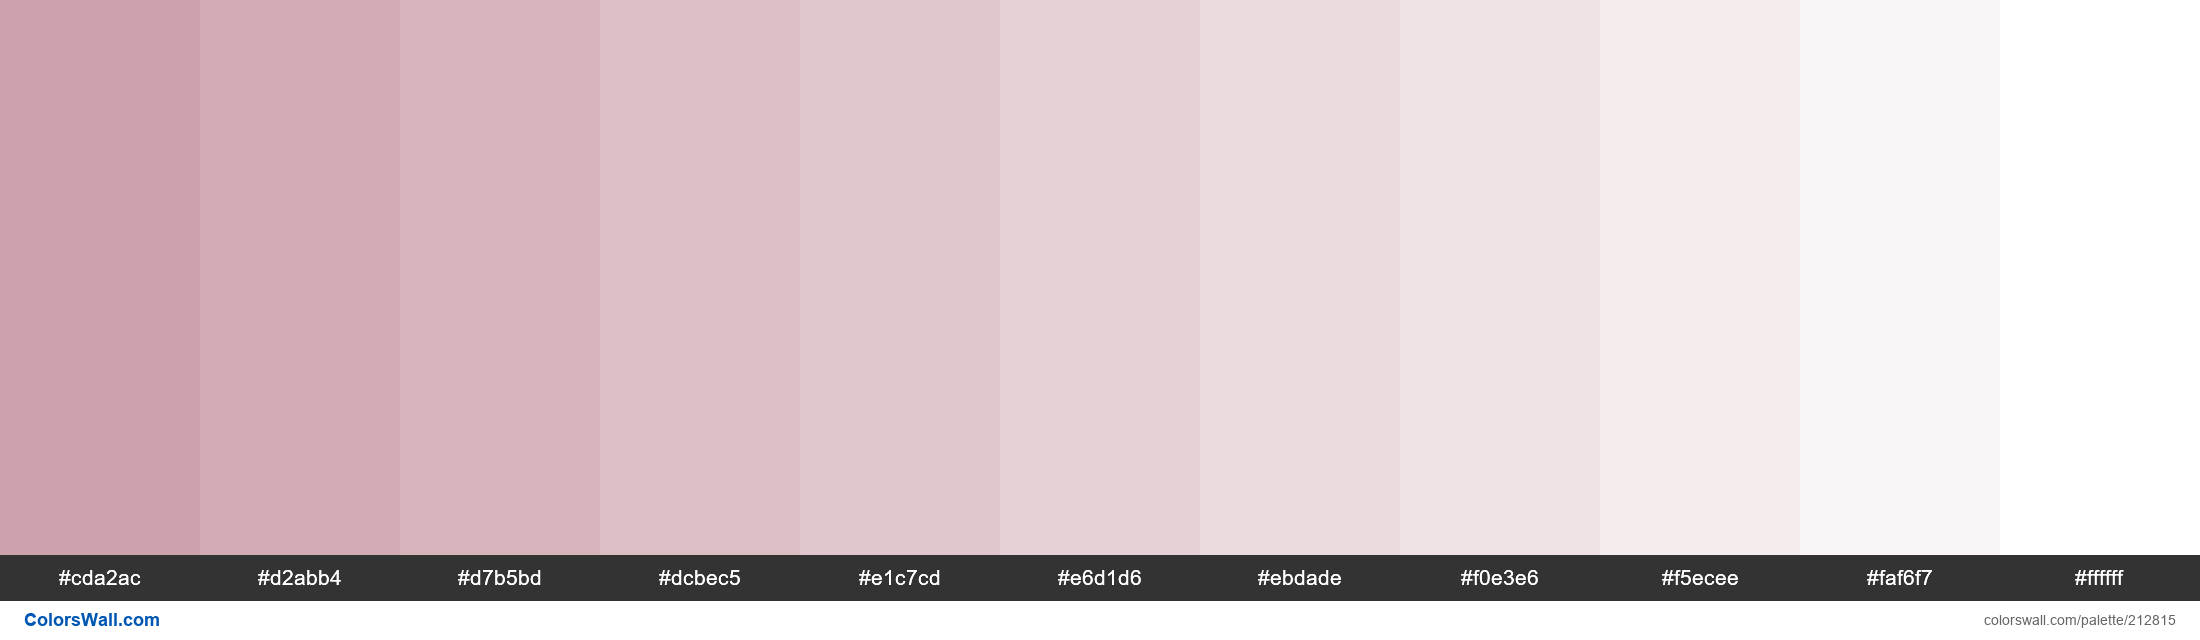 Whisper of Rose colors palette | ColorsWall